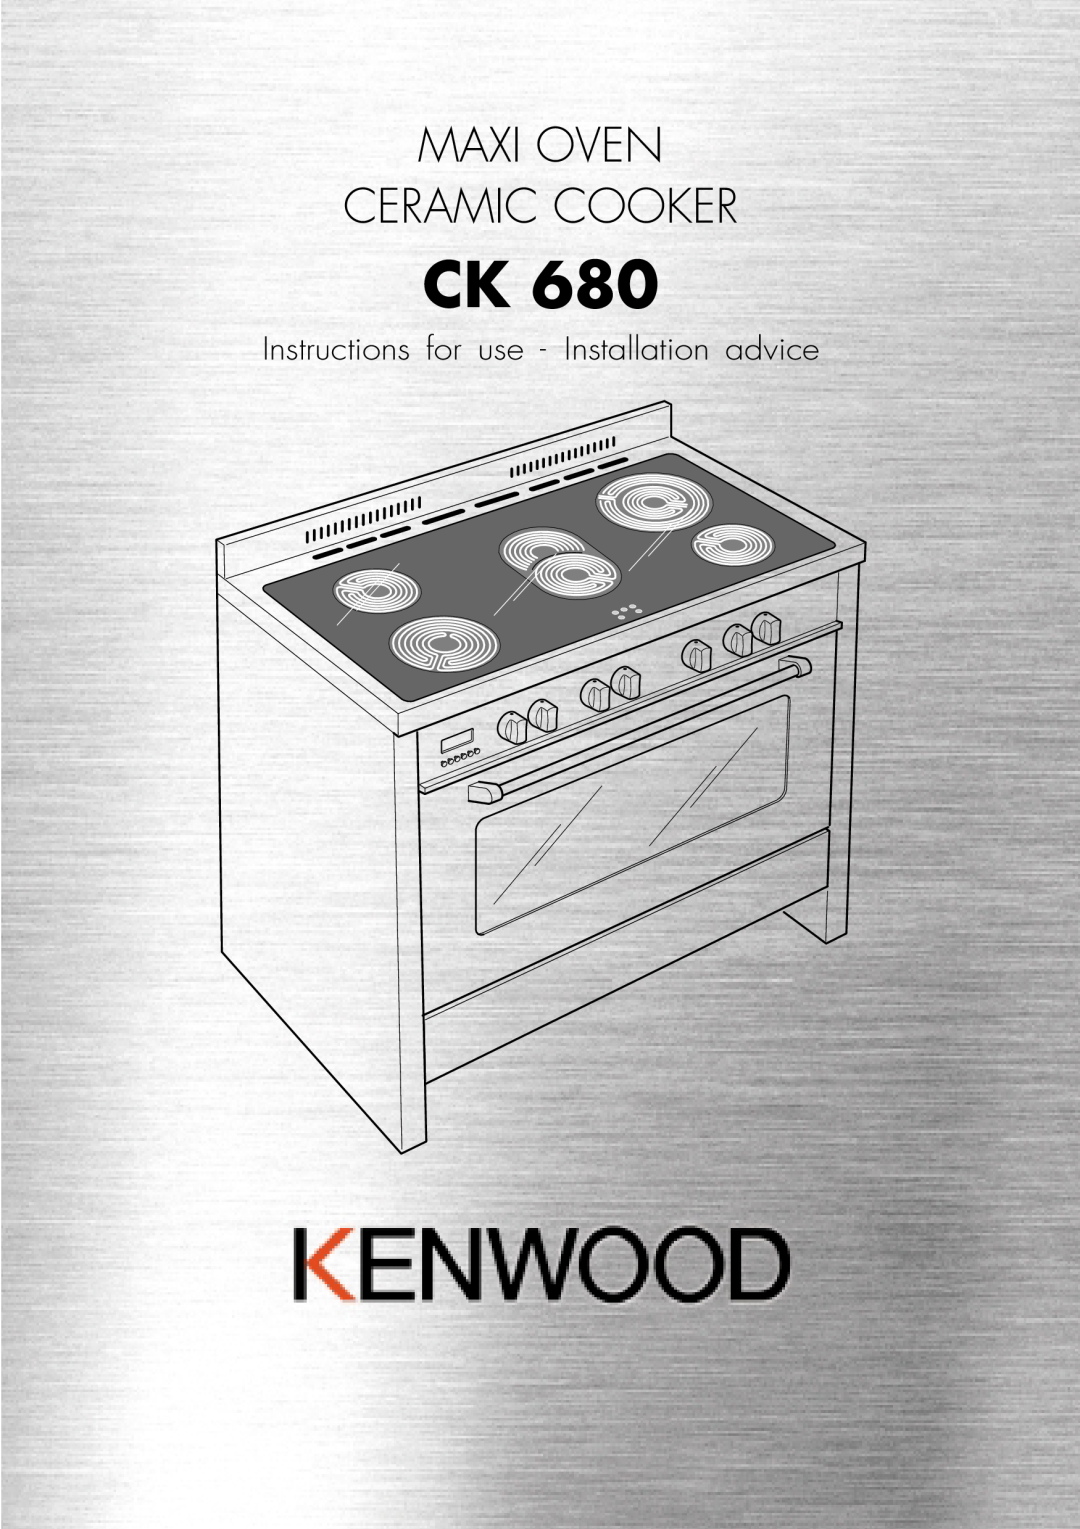 Kenwood CK 680 manual Maxi Oven Ceramic Cooker, Instructions for use - Installation advice 